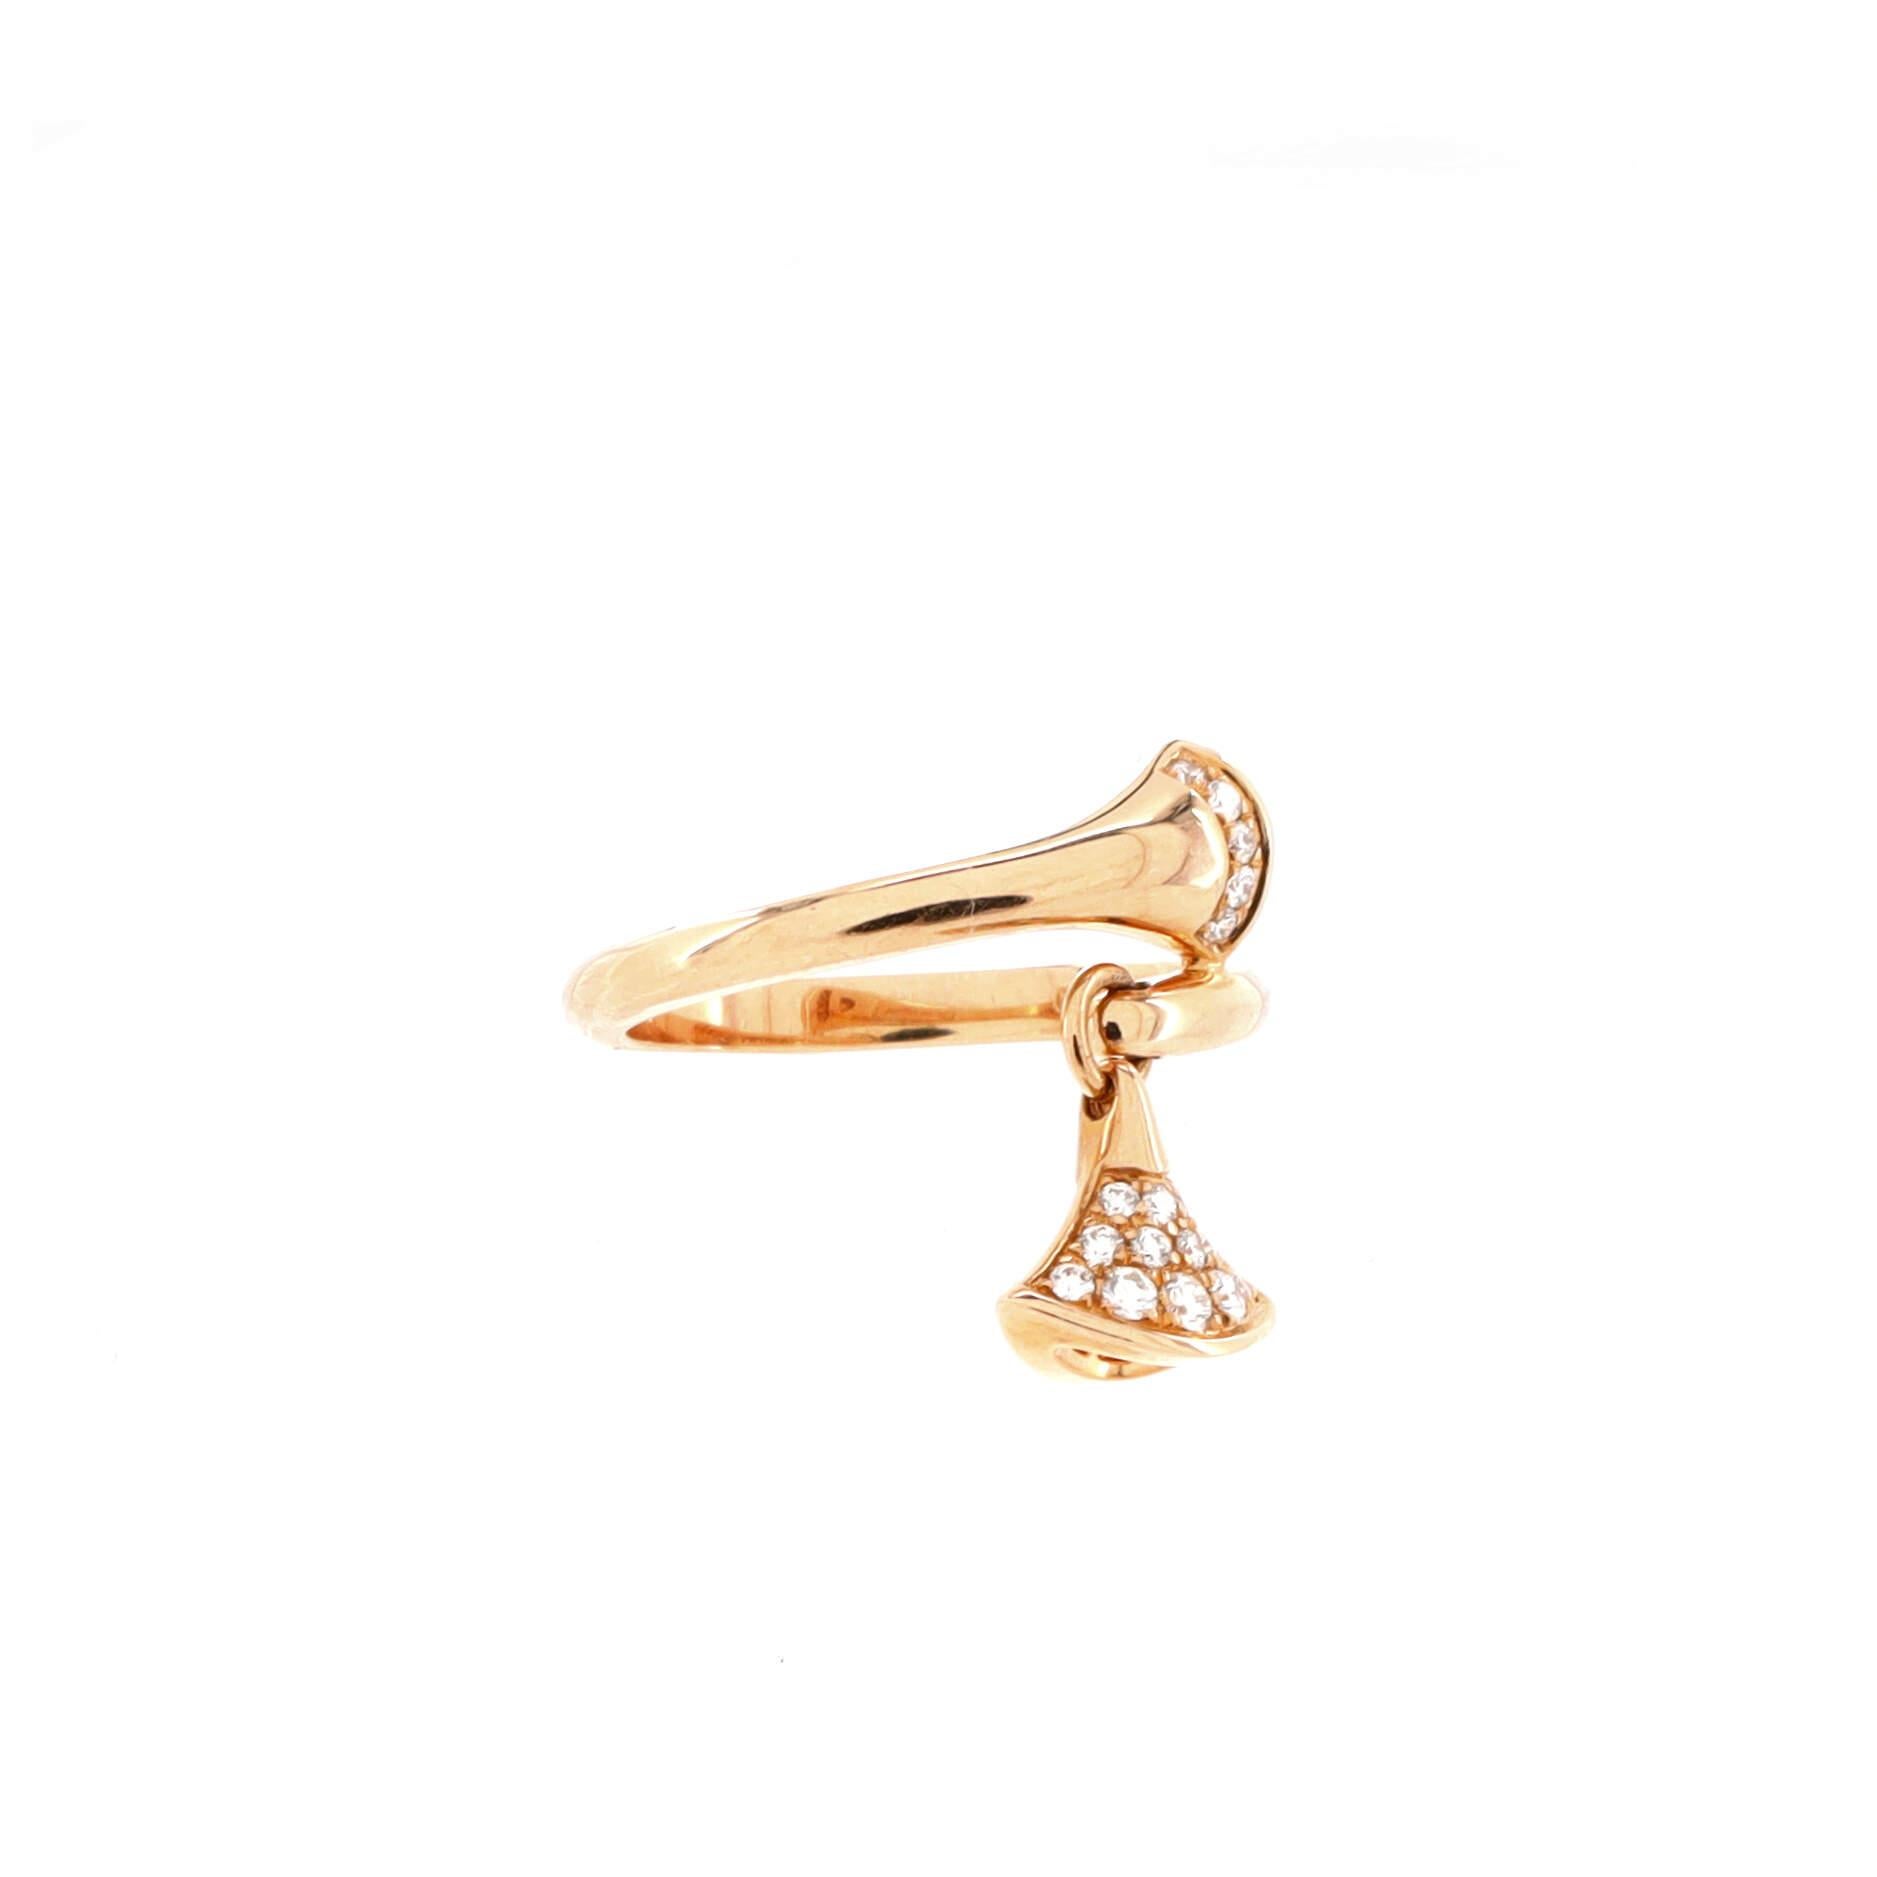 Condition: Great. Minor wear throughout.
Accessories: No Accessories
Measurements: Size: 6.5, Width: 2.30 mm
Designer: Bvlgari
Model: Divas' Dream Charm Ring 18K Rose Gold with Diamonds
Exterior Color: Rose Gold
Item Number: 180837/23